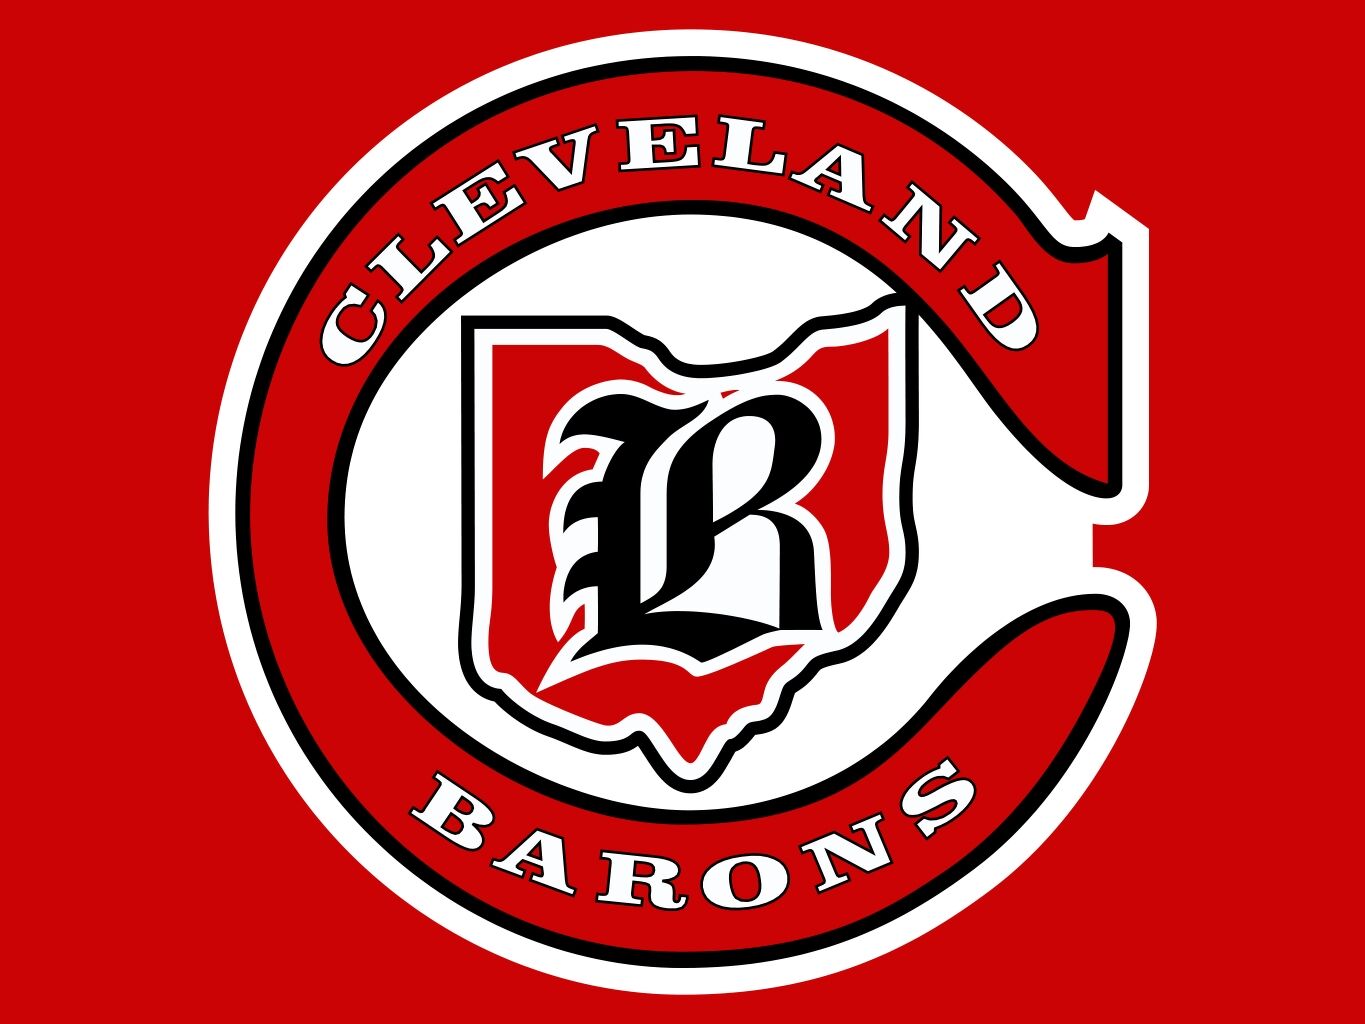 The forgotten story of  the Barons, Cleveland's ill-fated NHL team, NHL